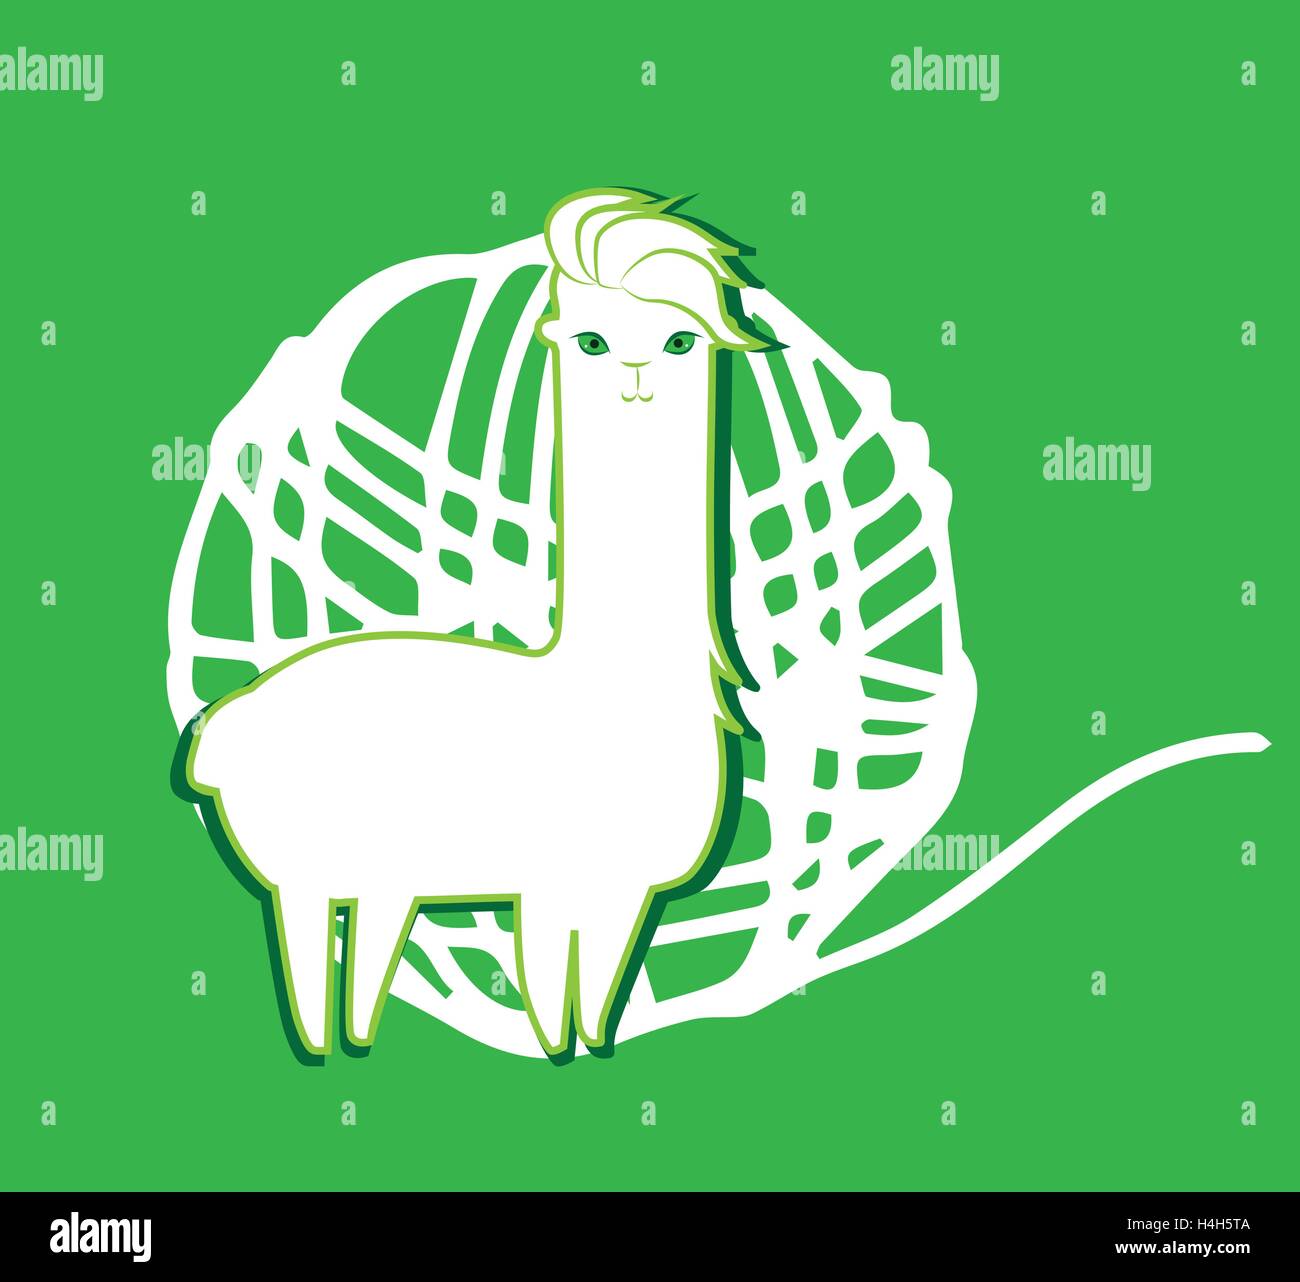 Lama and Lama Yarn Concept Design. EPS 8 supported. Stock Vector